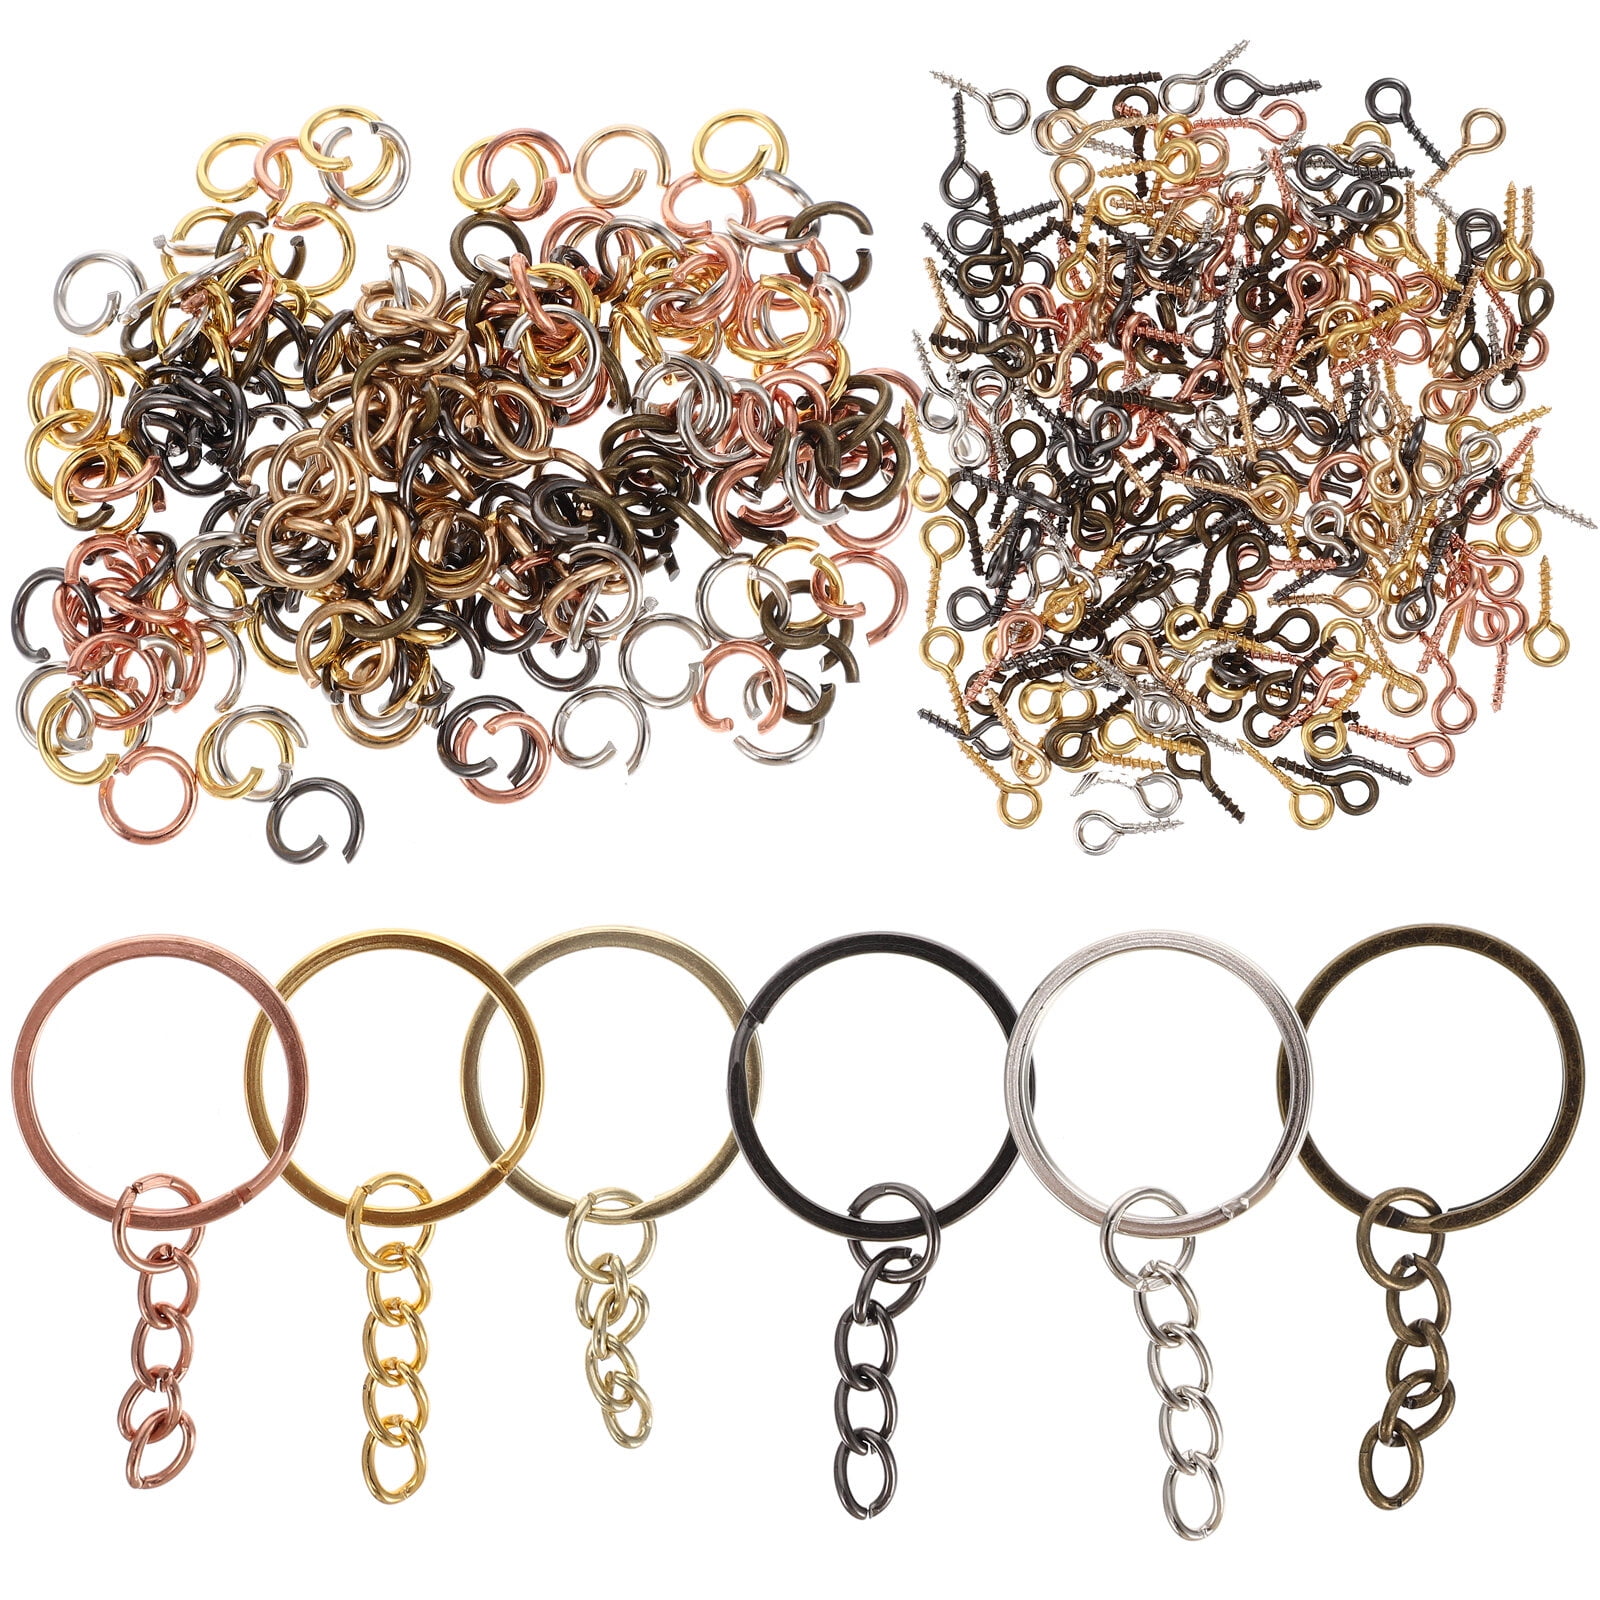 DIY Crafts 5 Sets 20 Pcs - 50 Sets Keychain Rings for Crafts, Key Rings  with Chains, Jump Rings & Screw Eye Pins for Jewelry Findings Making  Handbag Keychain (10 Sets 40